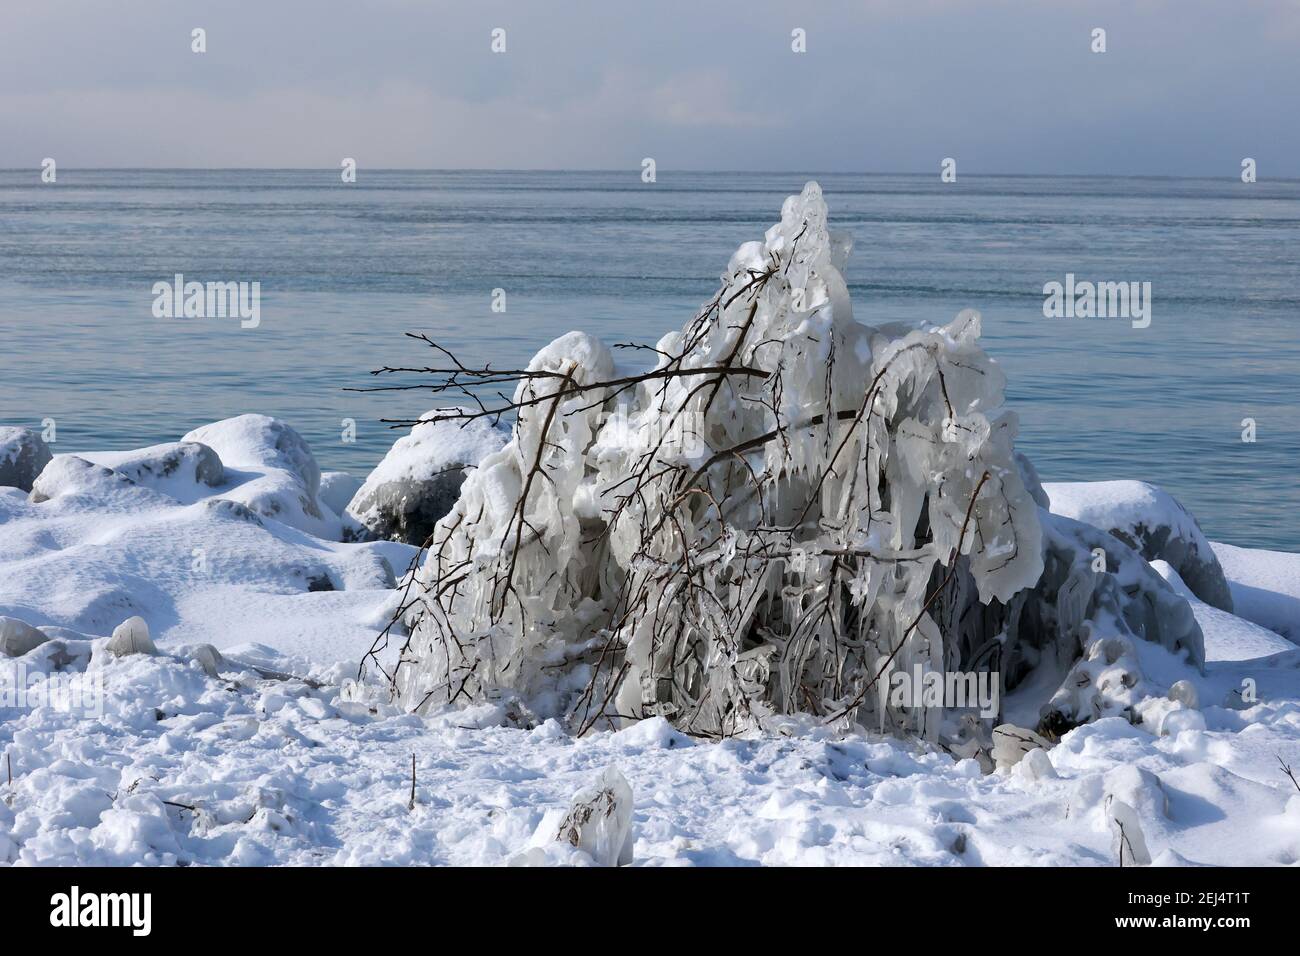 Icy landscapes in winter at harbour Stock Photo